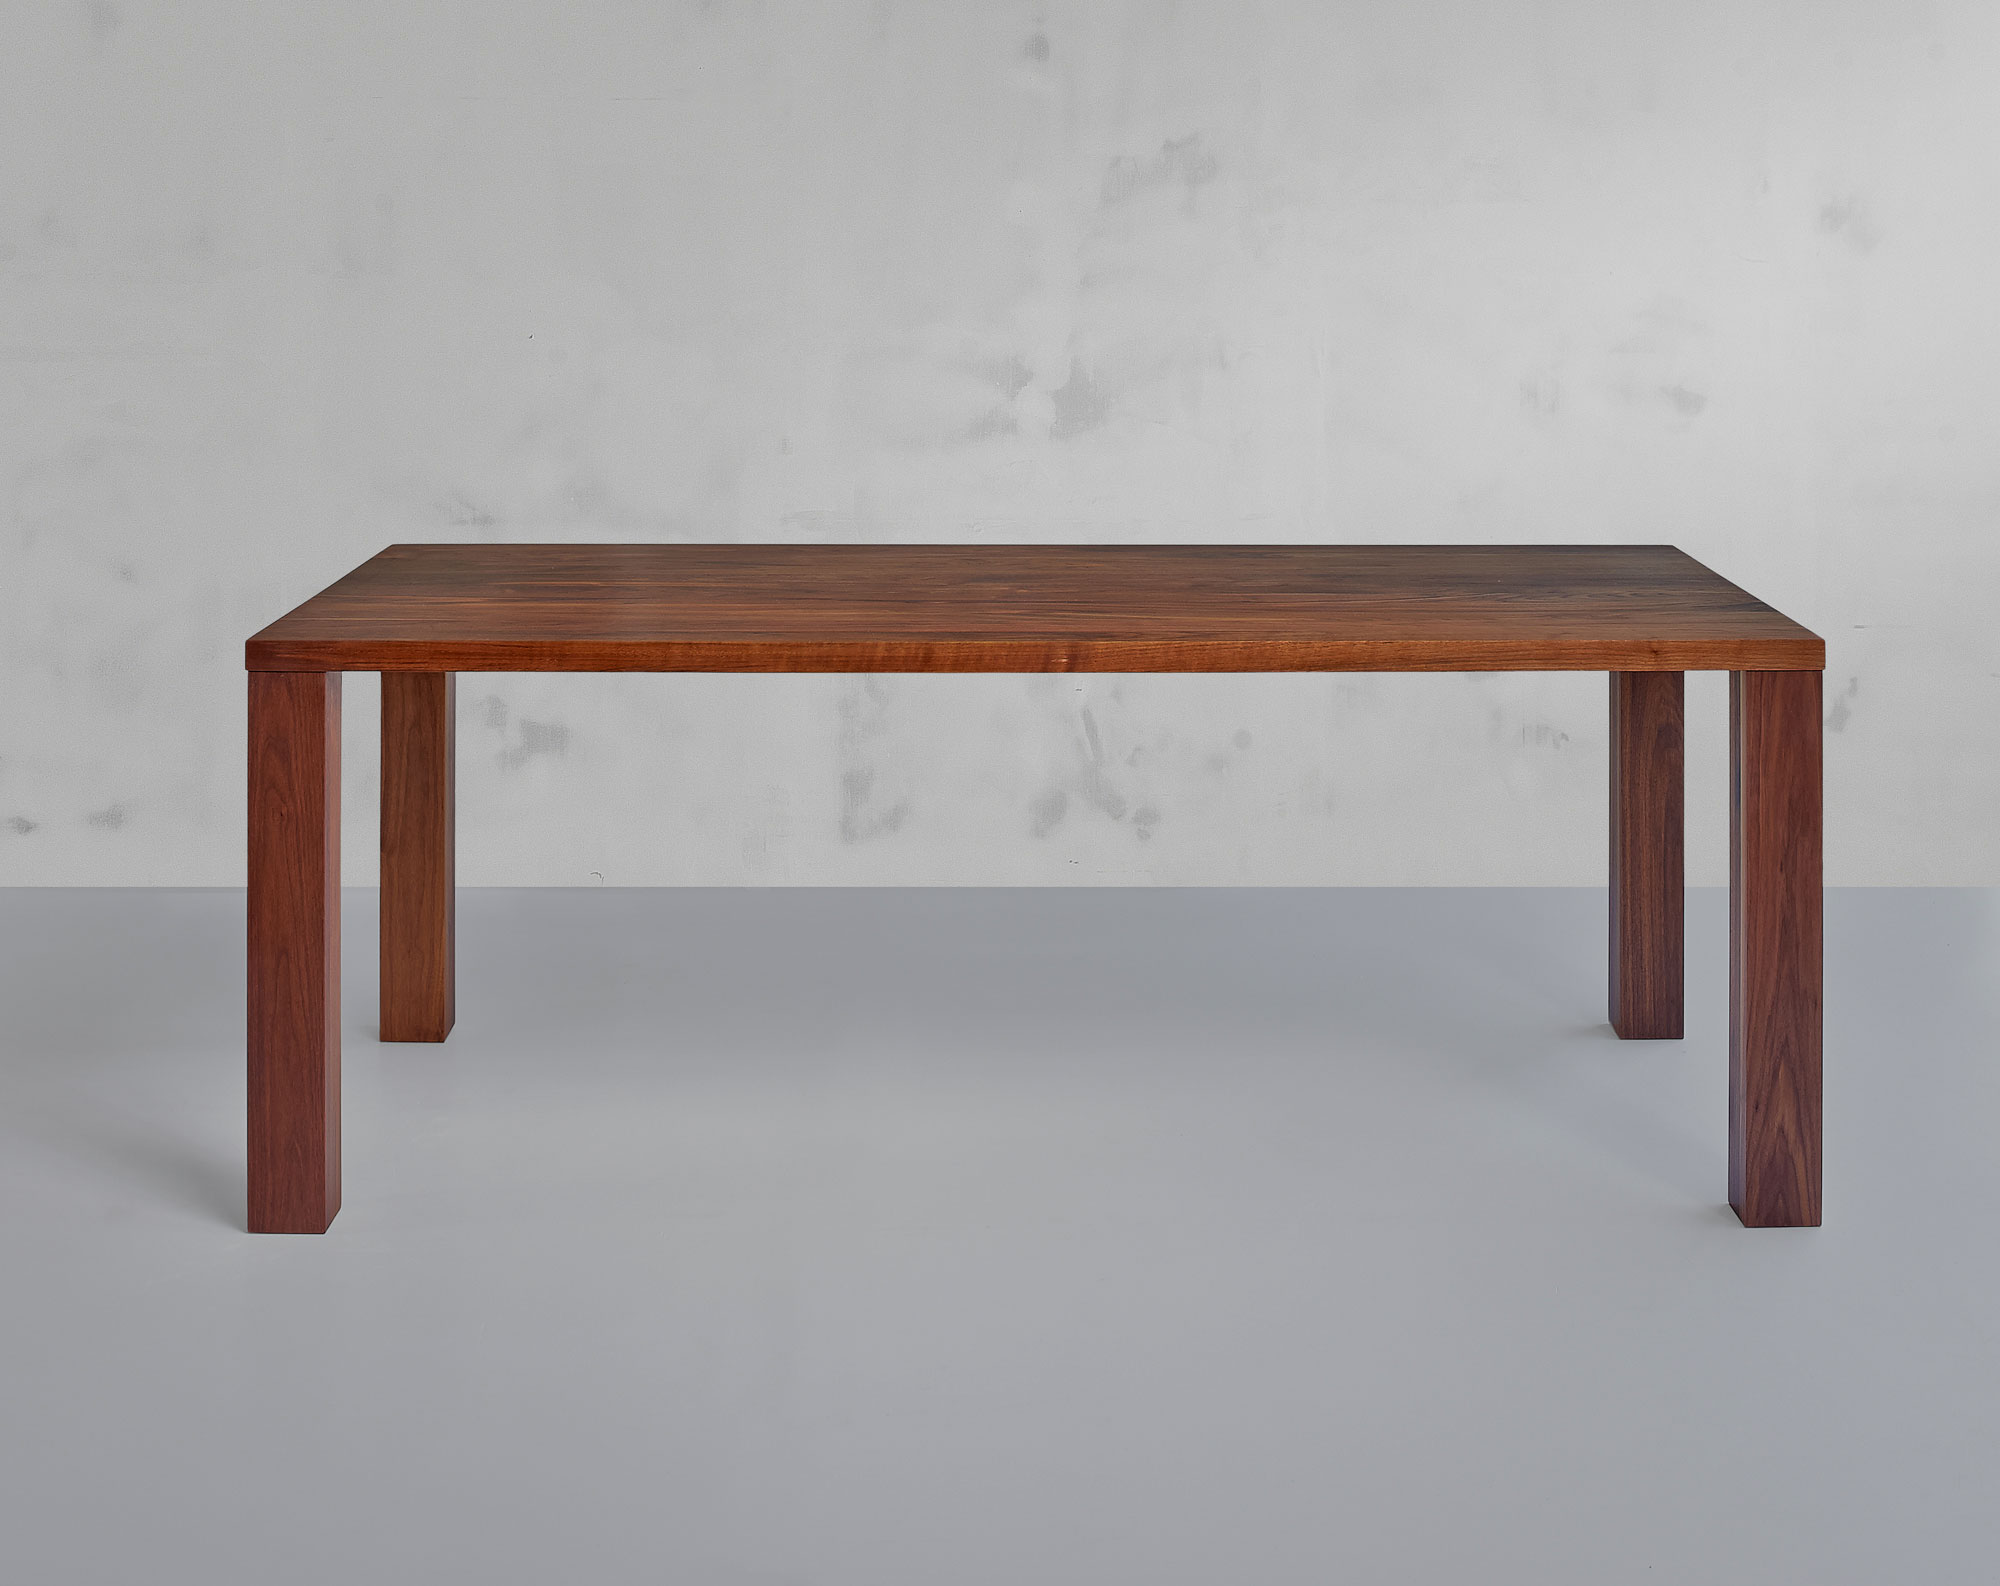 Frameless Solid Wood Table IUSTUS 0963pk custom made in solid wood by vitamin design